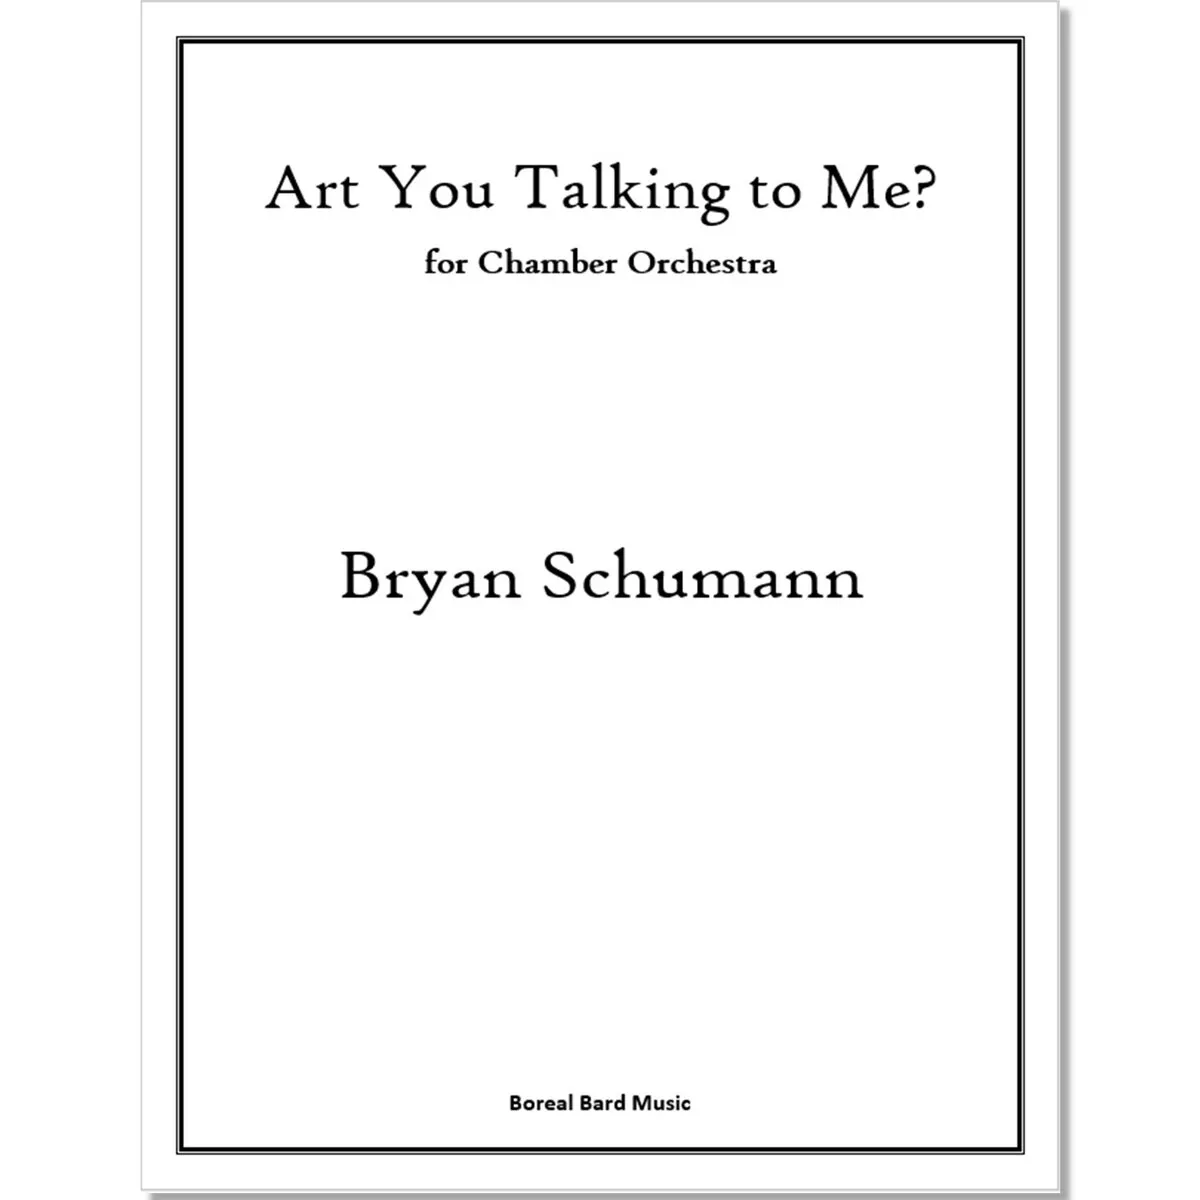 Art You Talking to Me? for Chamber Orchestra (sheet music)